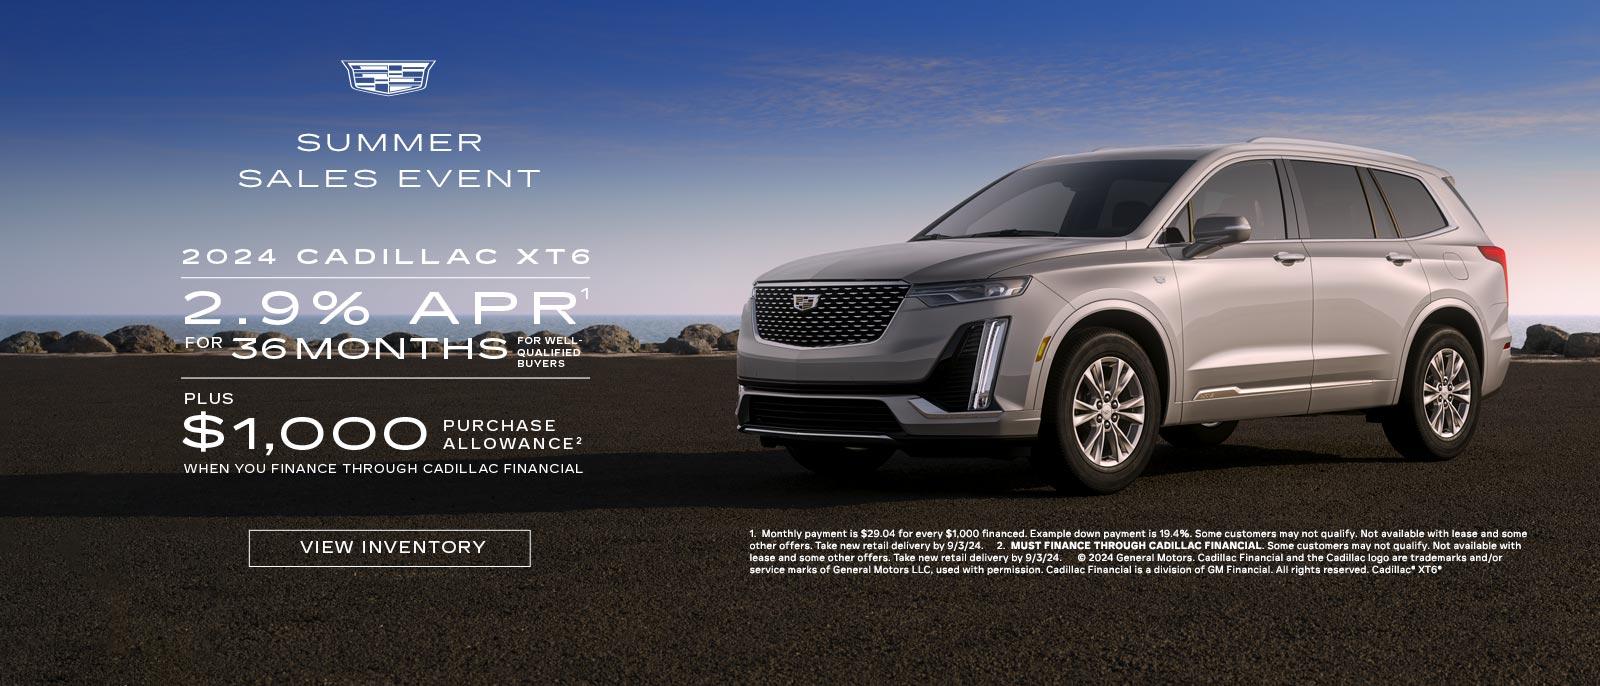 2024 Cadillac XT6. 2.9% APR for 36 months. Plus $1,000 purchase allowance.